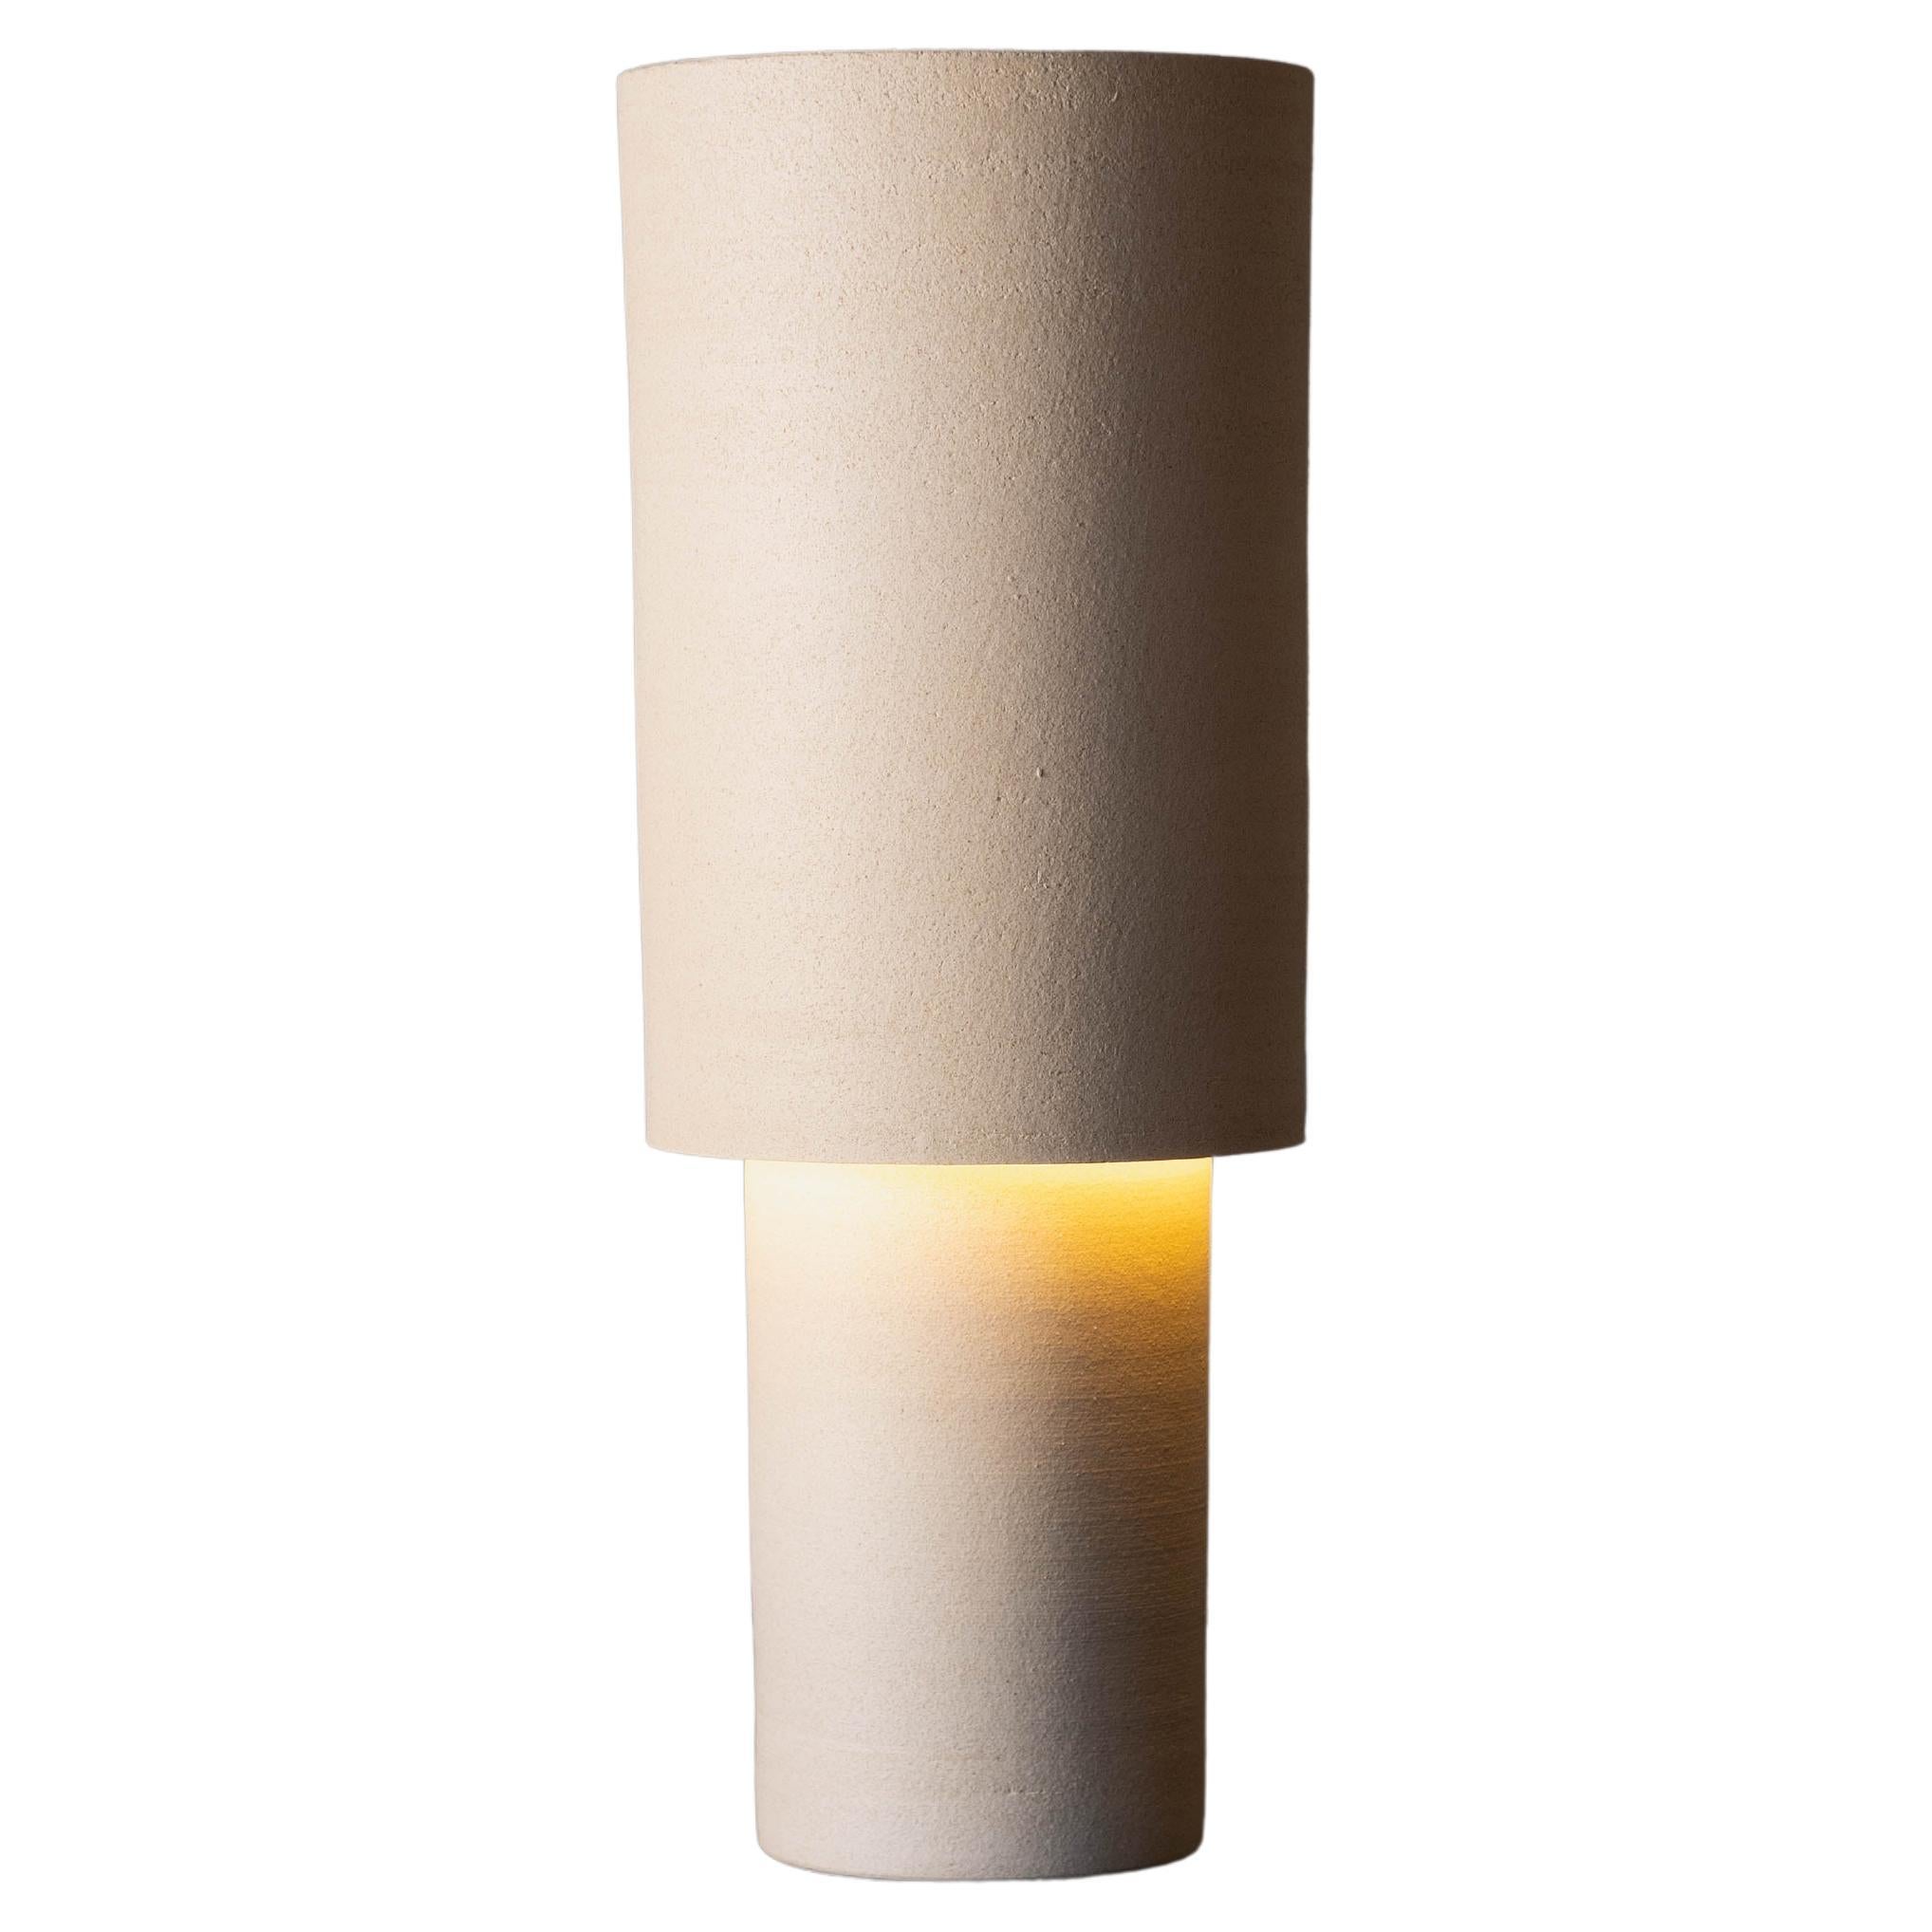 Ceramic Straight Walled Lamp For Sale